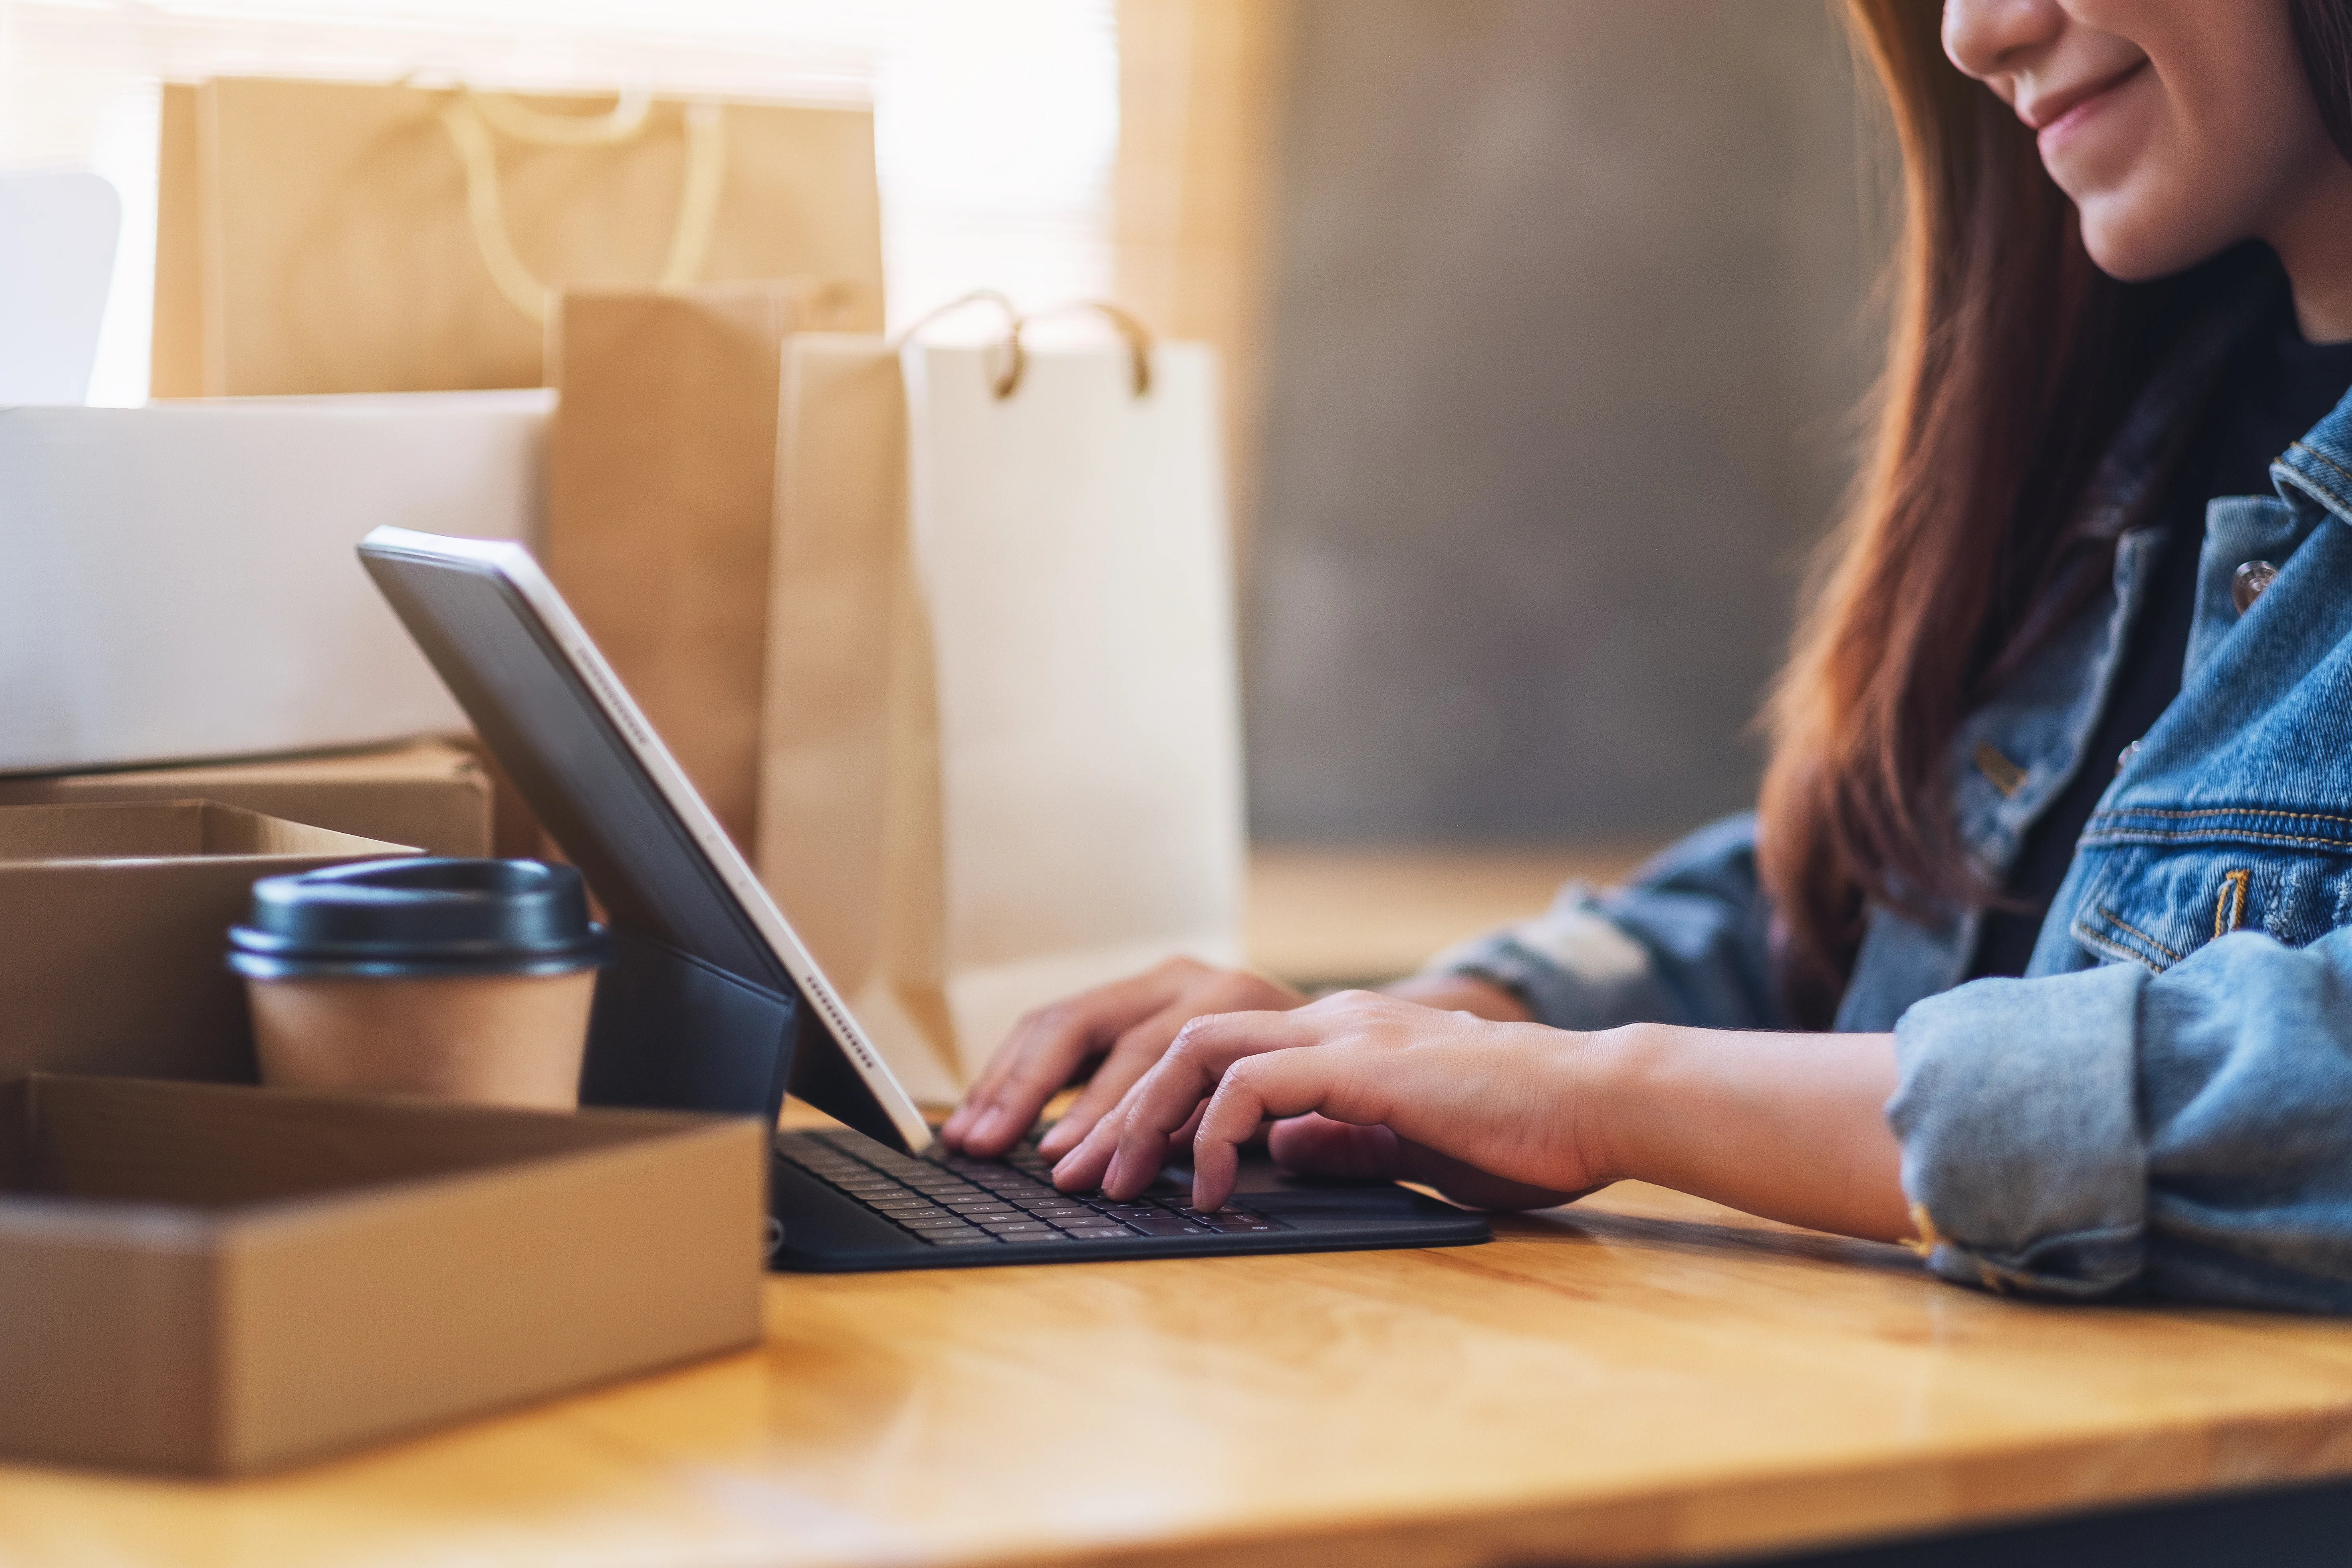 closeup-image-of-a-young-asian-woman-typing-on-tablet-pc-for-online-shopping-with-postal-parcel-box-and-shopping-bags-on-the-table-at-home